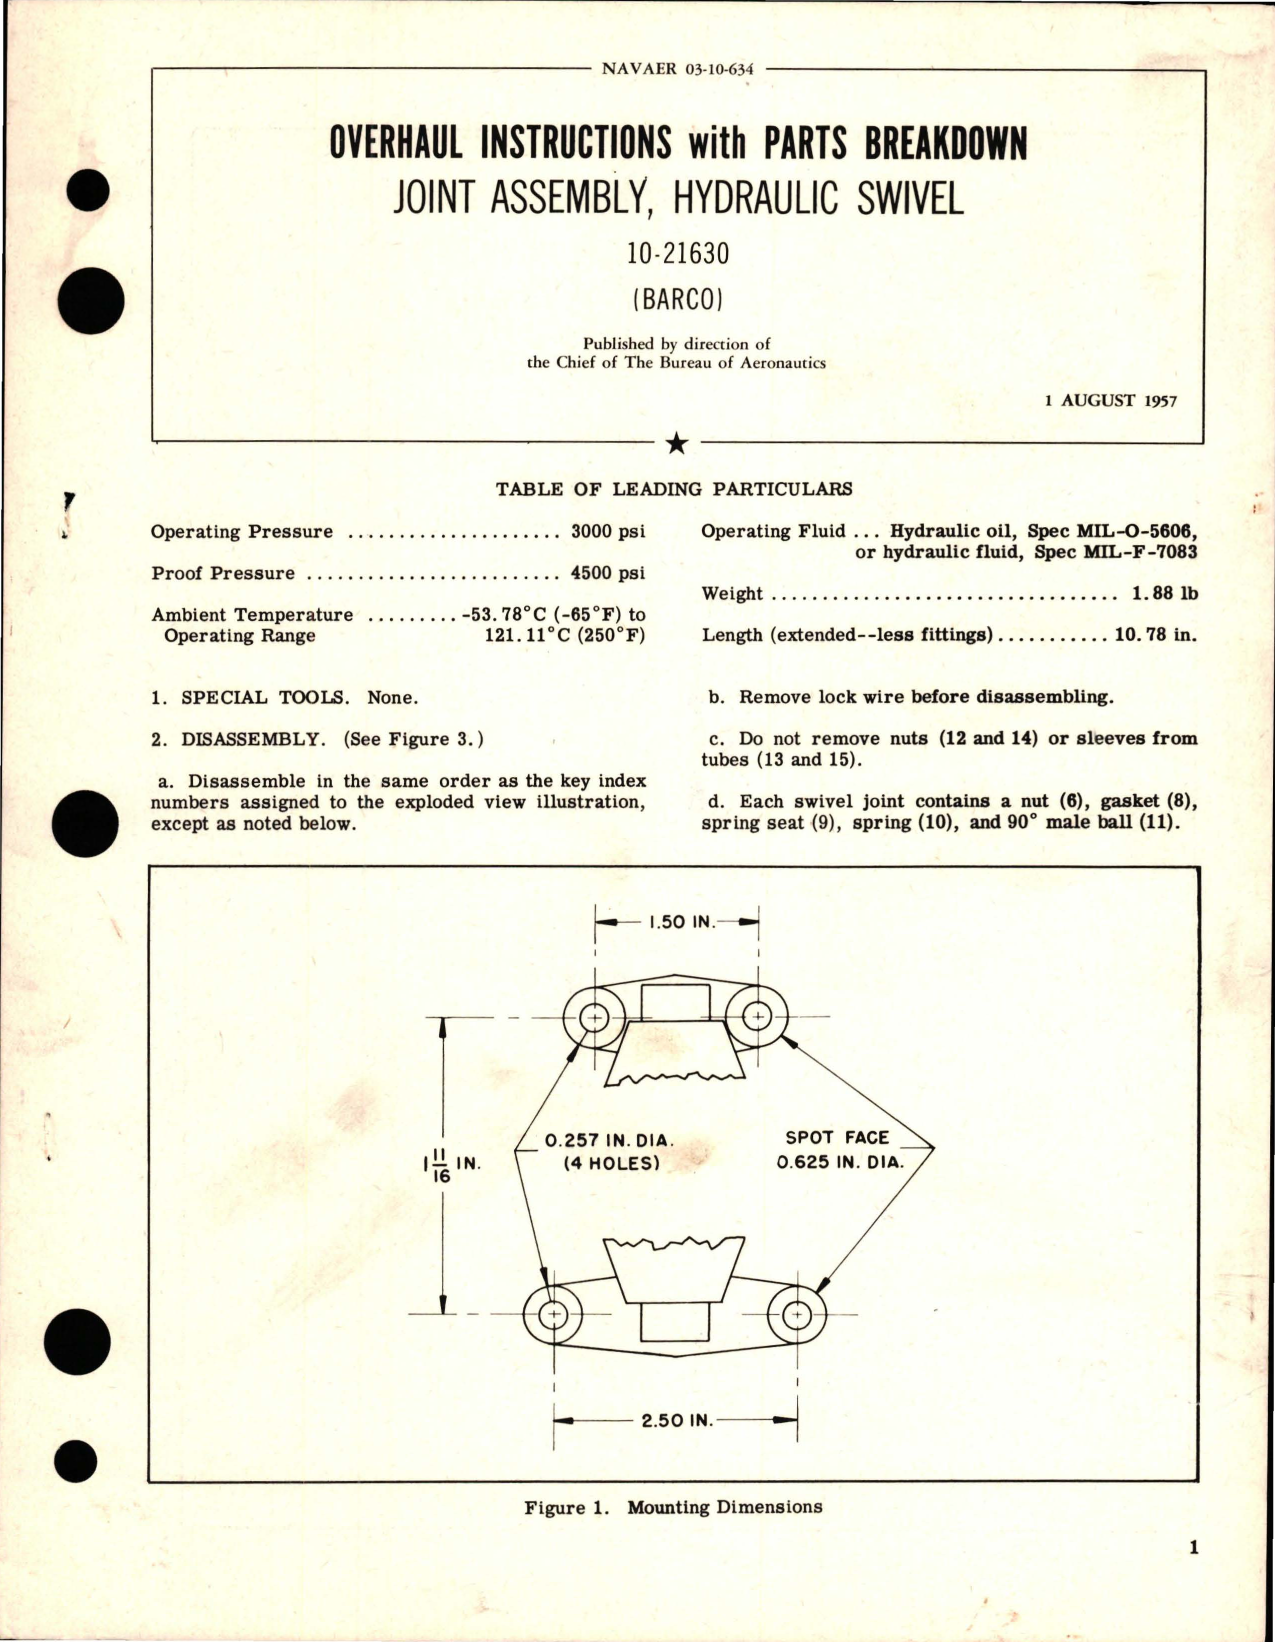 Sample page 1 from AirCorps Library document: Overhaul Instructions with Parts Breakdown for Hydraulic Swivel Joint Assembly - 10-21630